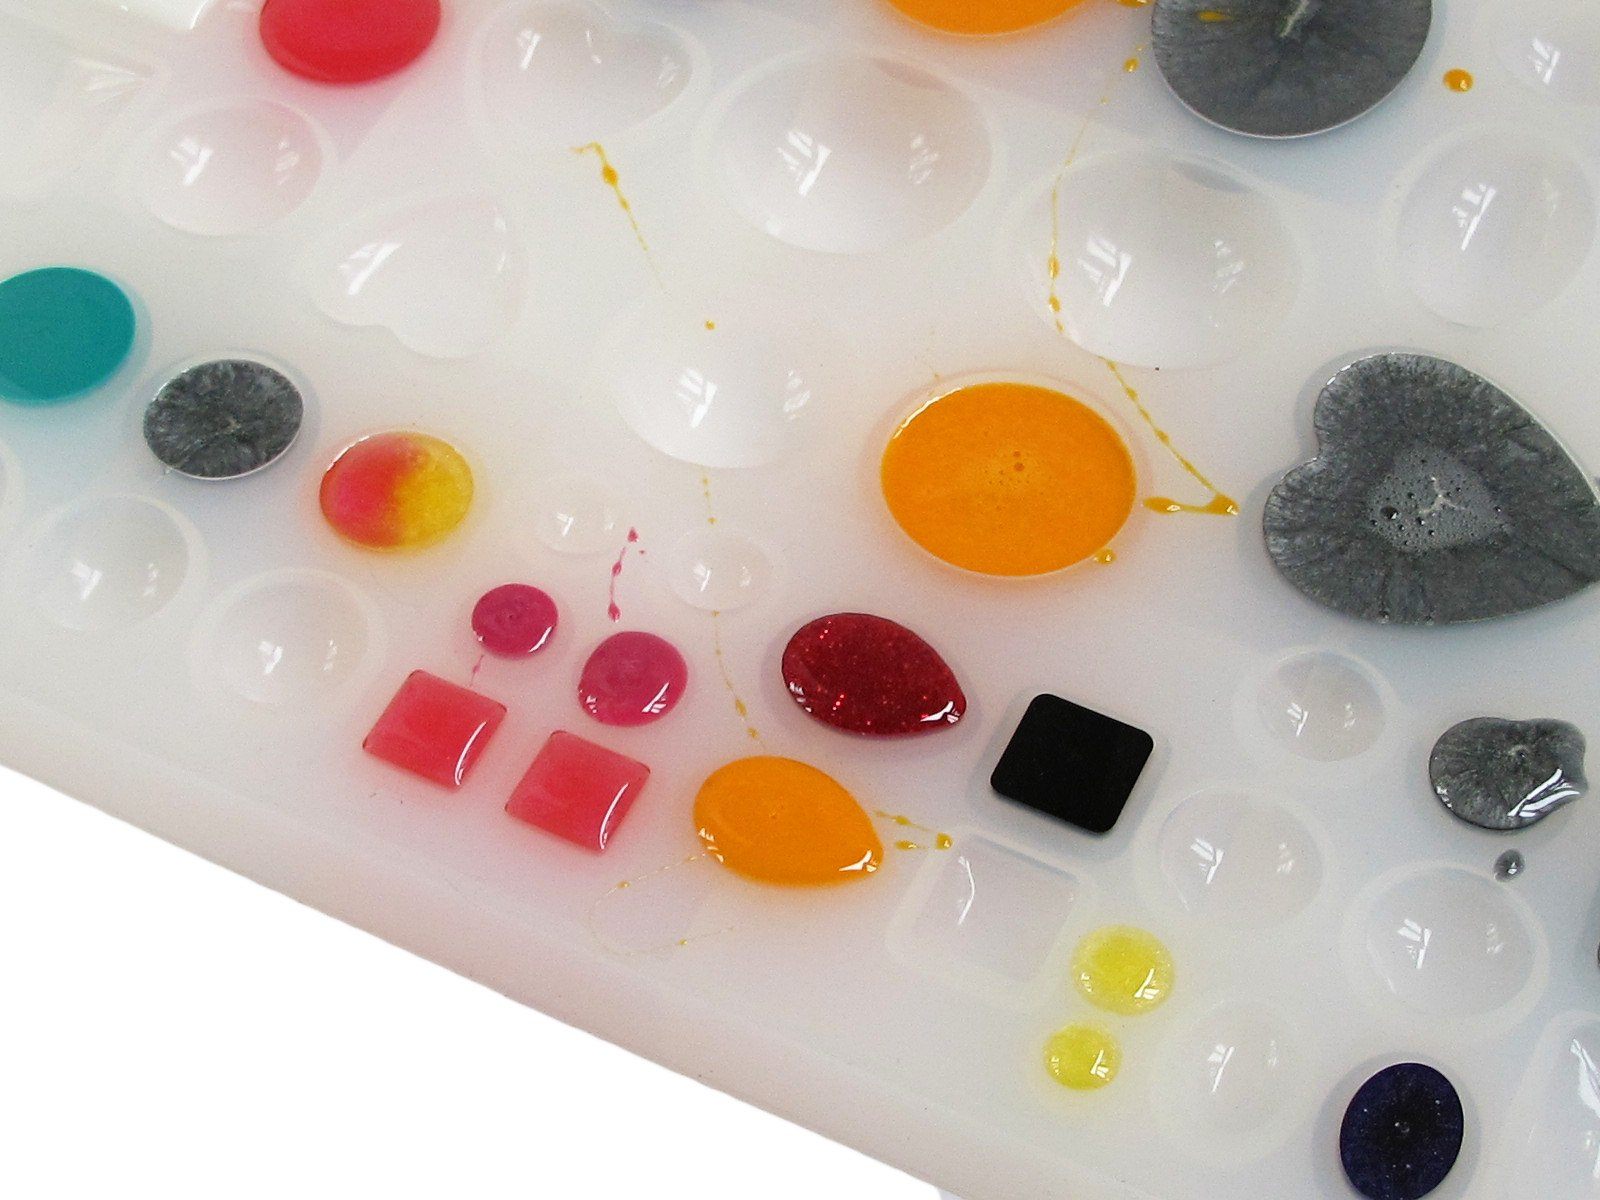 Clear silicone cabochon mold - 8 cavity - epoxy resin mold